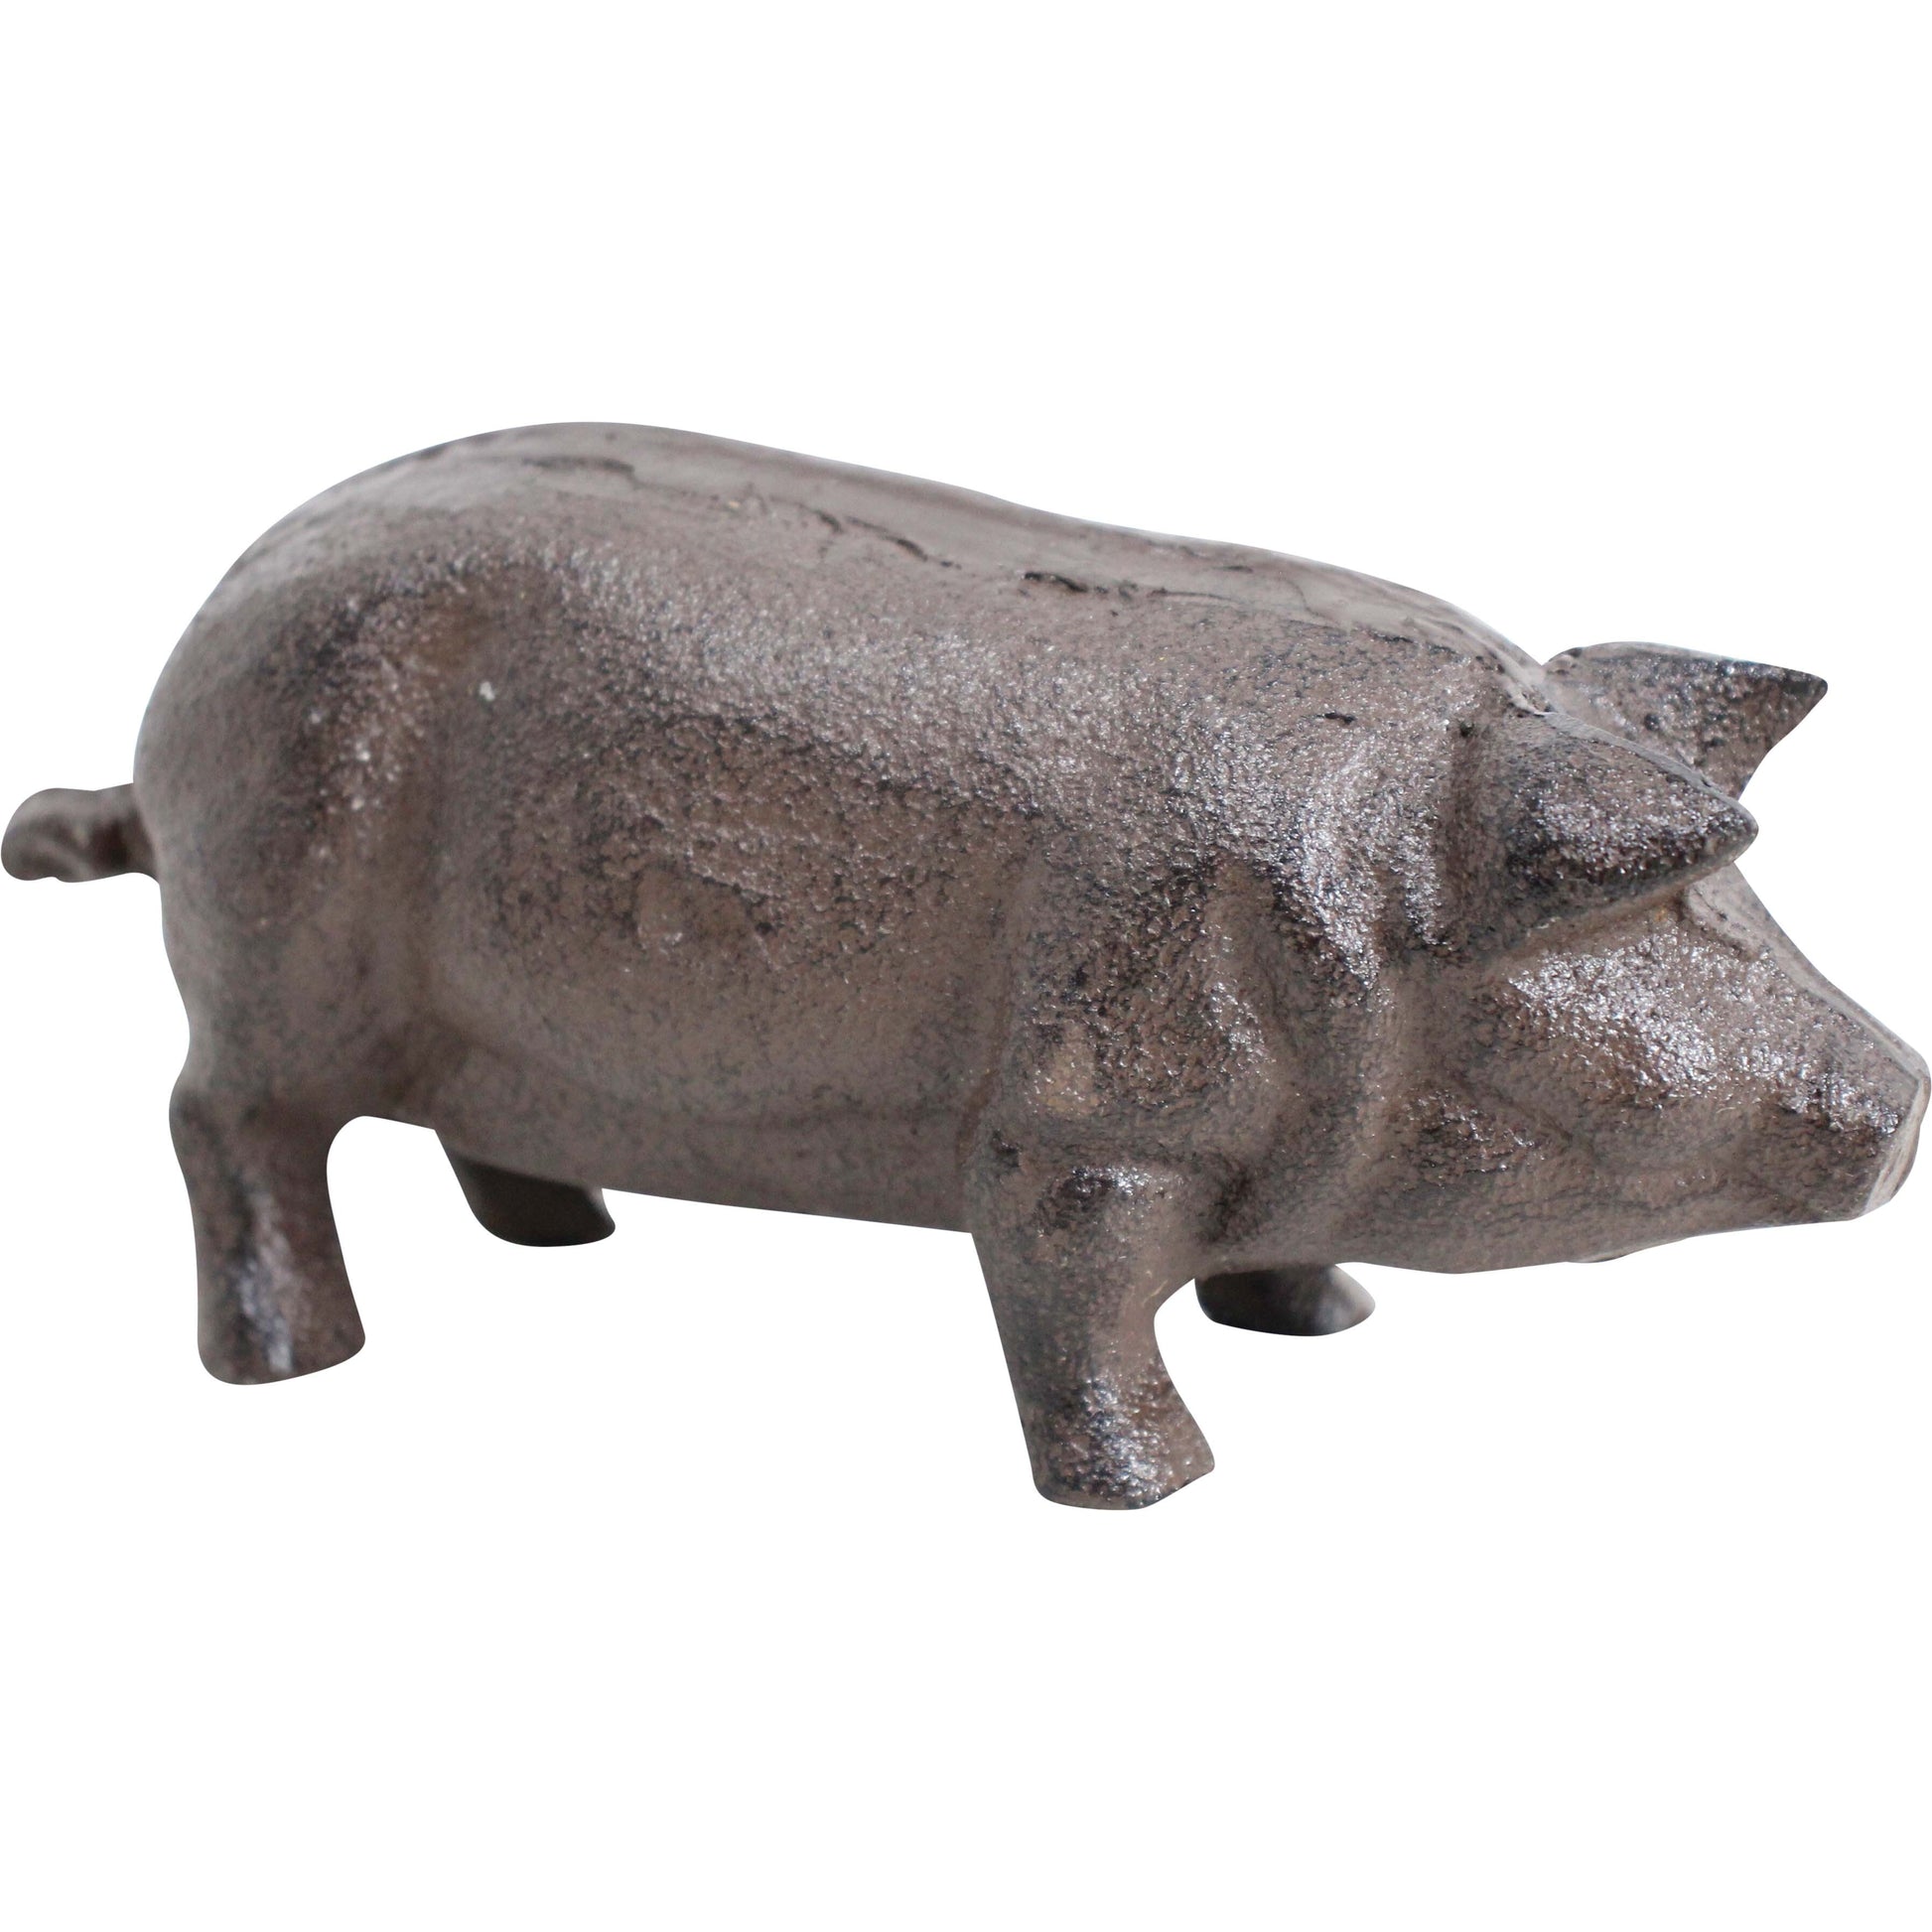 Pig Cast Iron Country Ornament - The Renmy Store Homewares & Gifts 